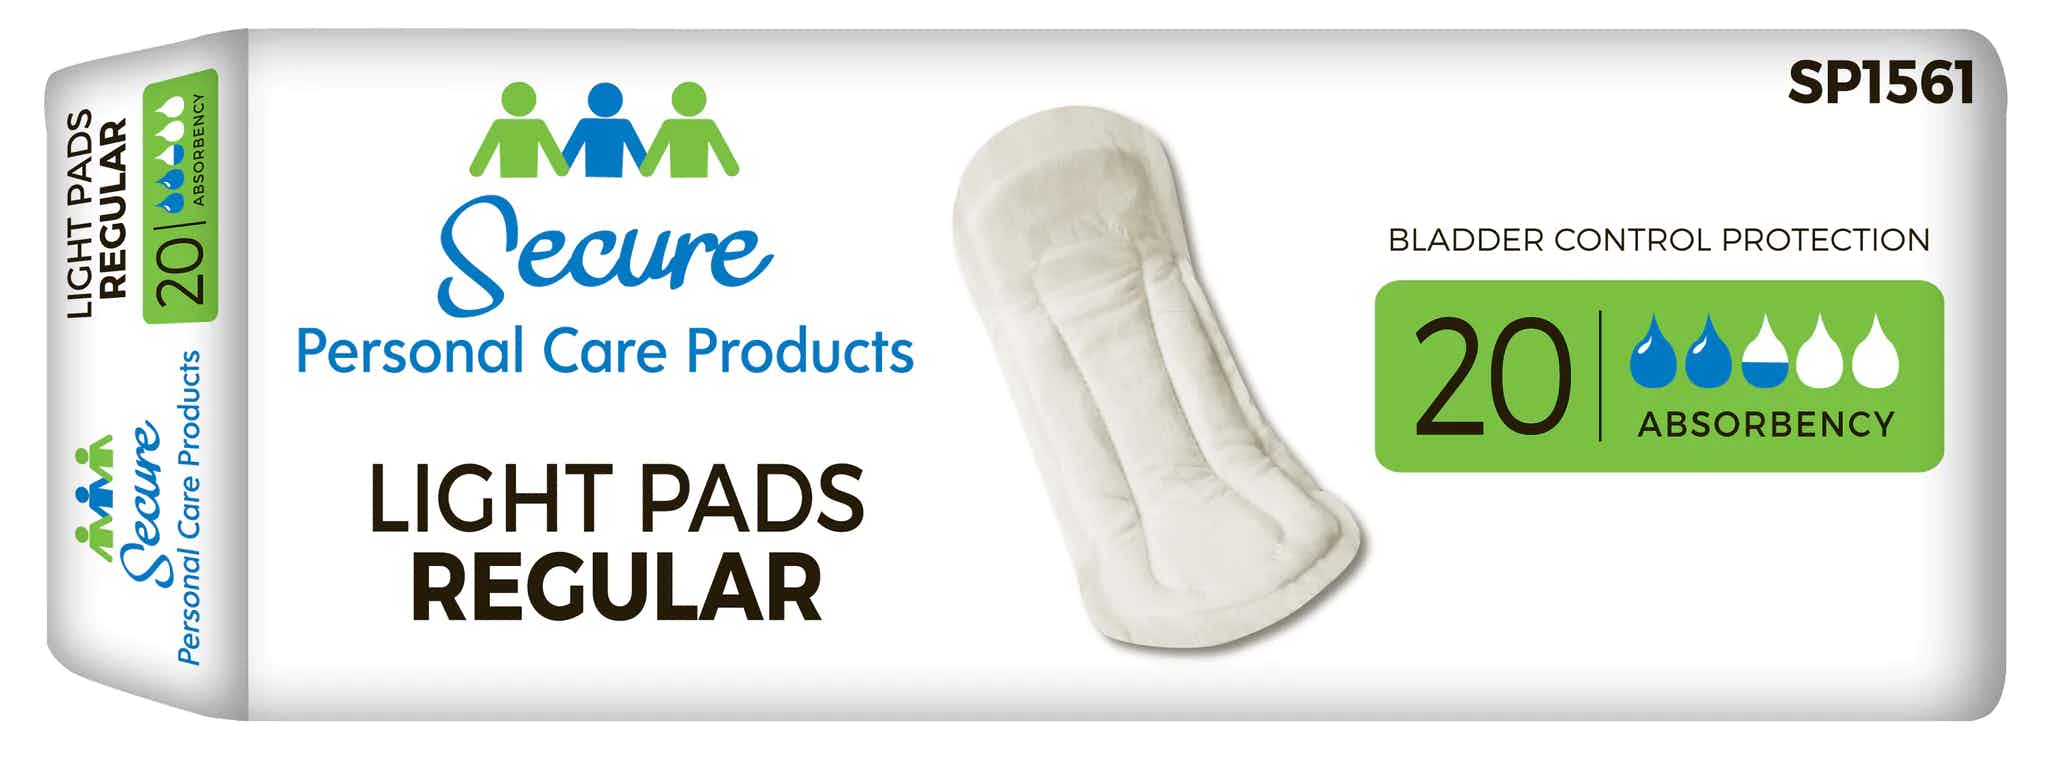 Secure Personal Care Products Women's Bladder Control Light Pads Regular